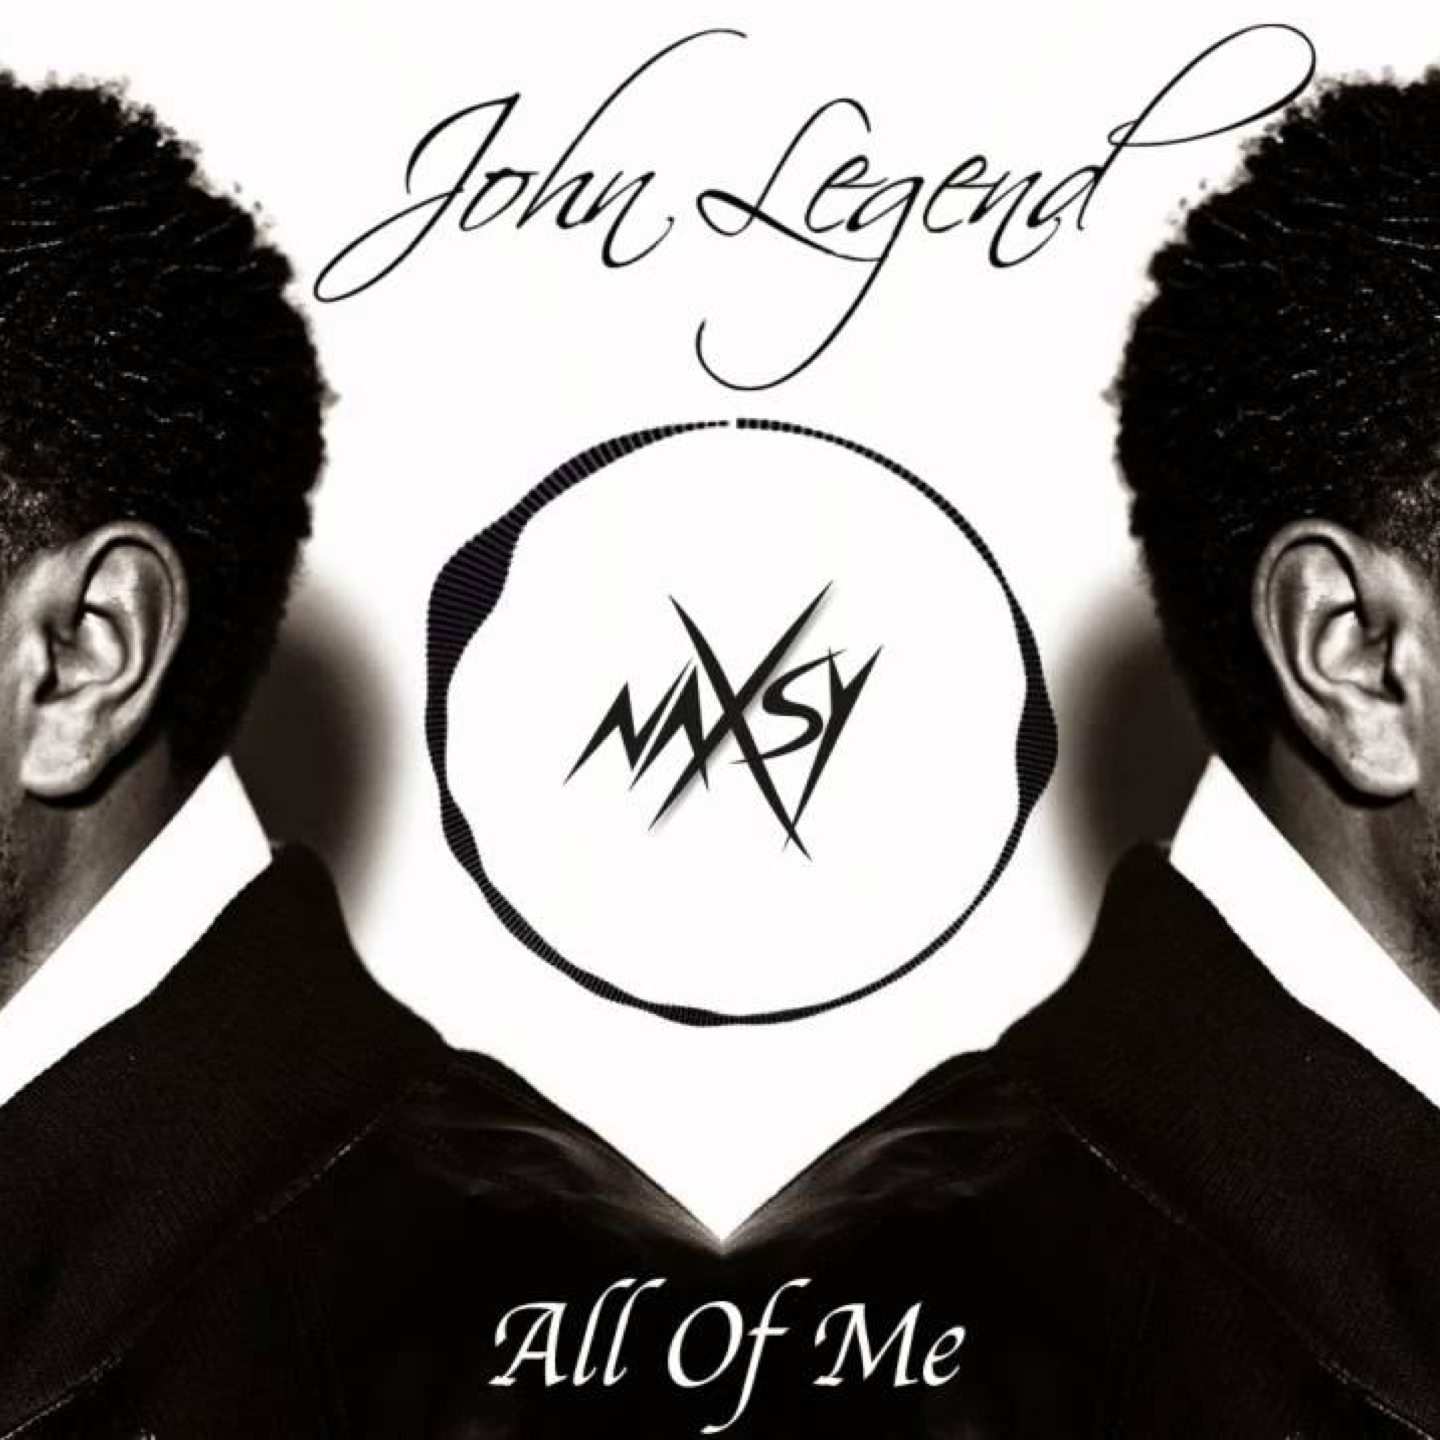 All Of Me feat. John Legend (Naxsy Deep Remix) -
                    Luxe radio